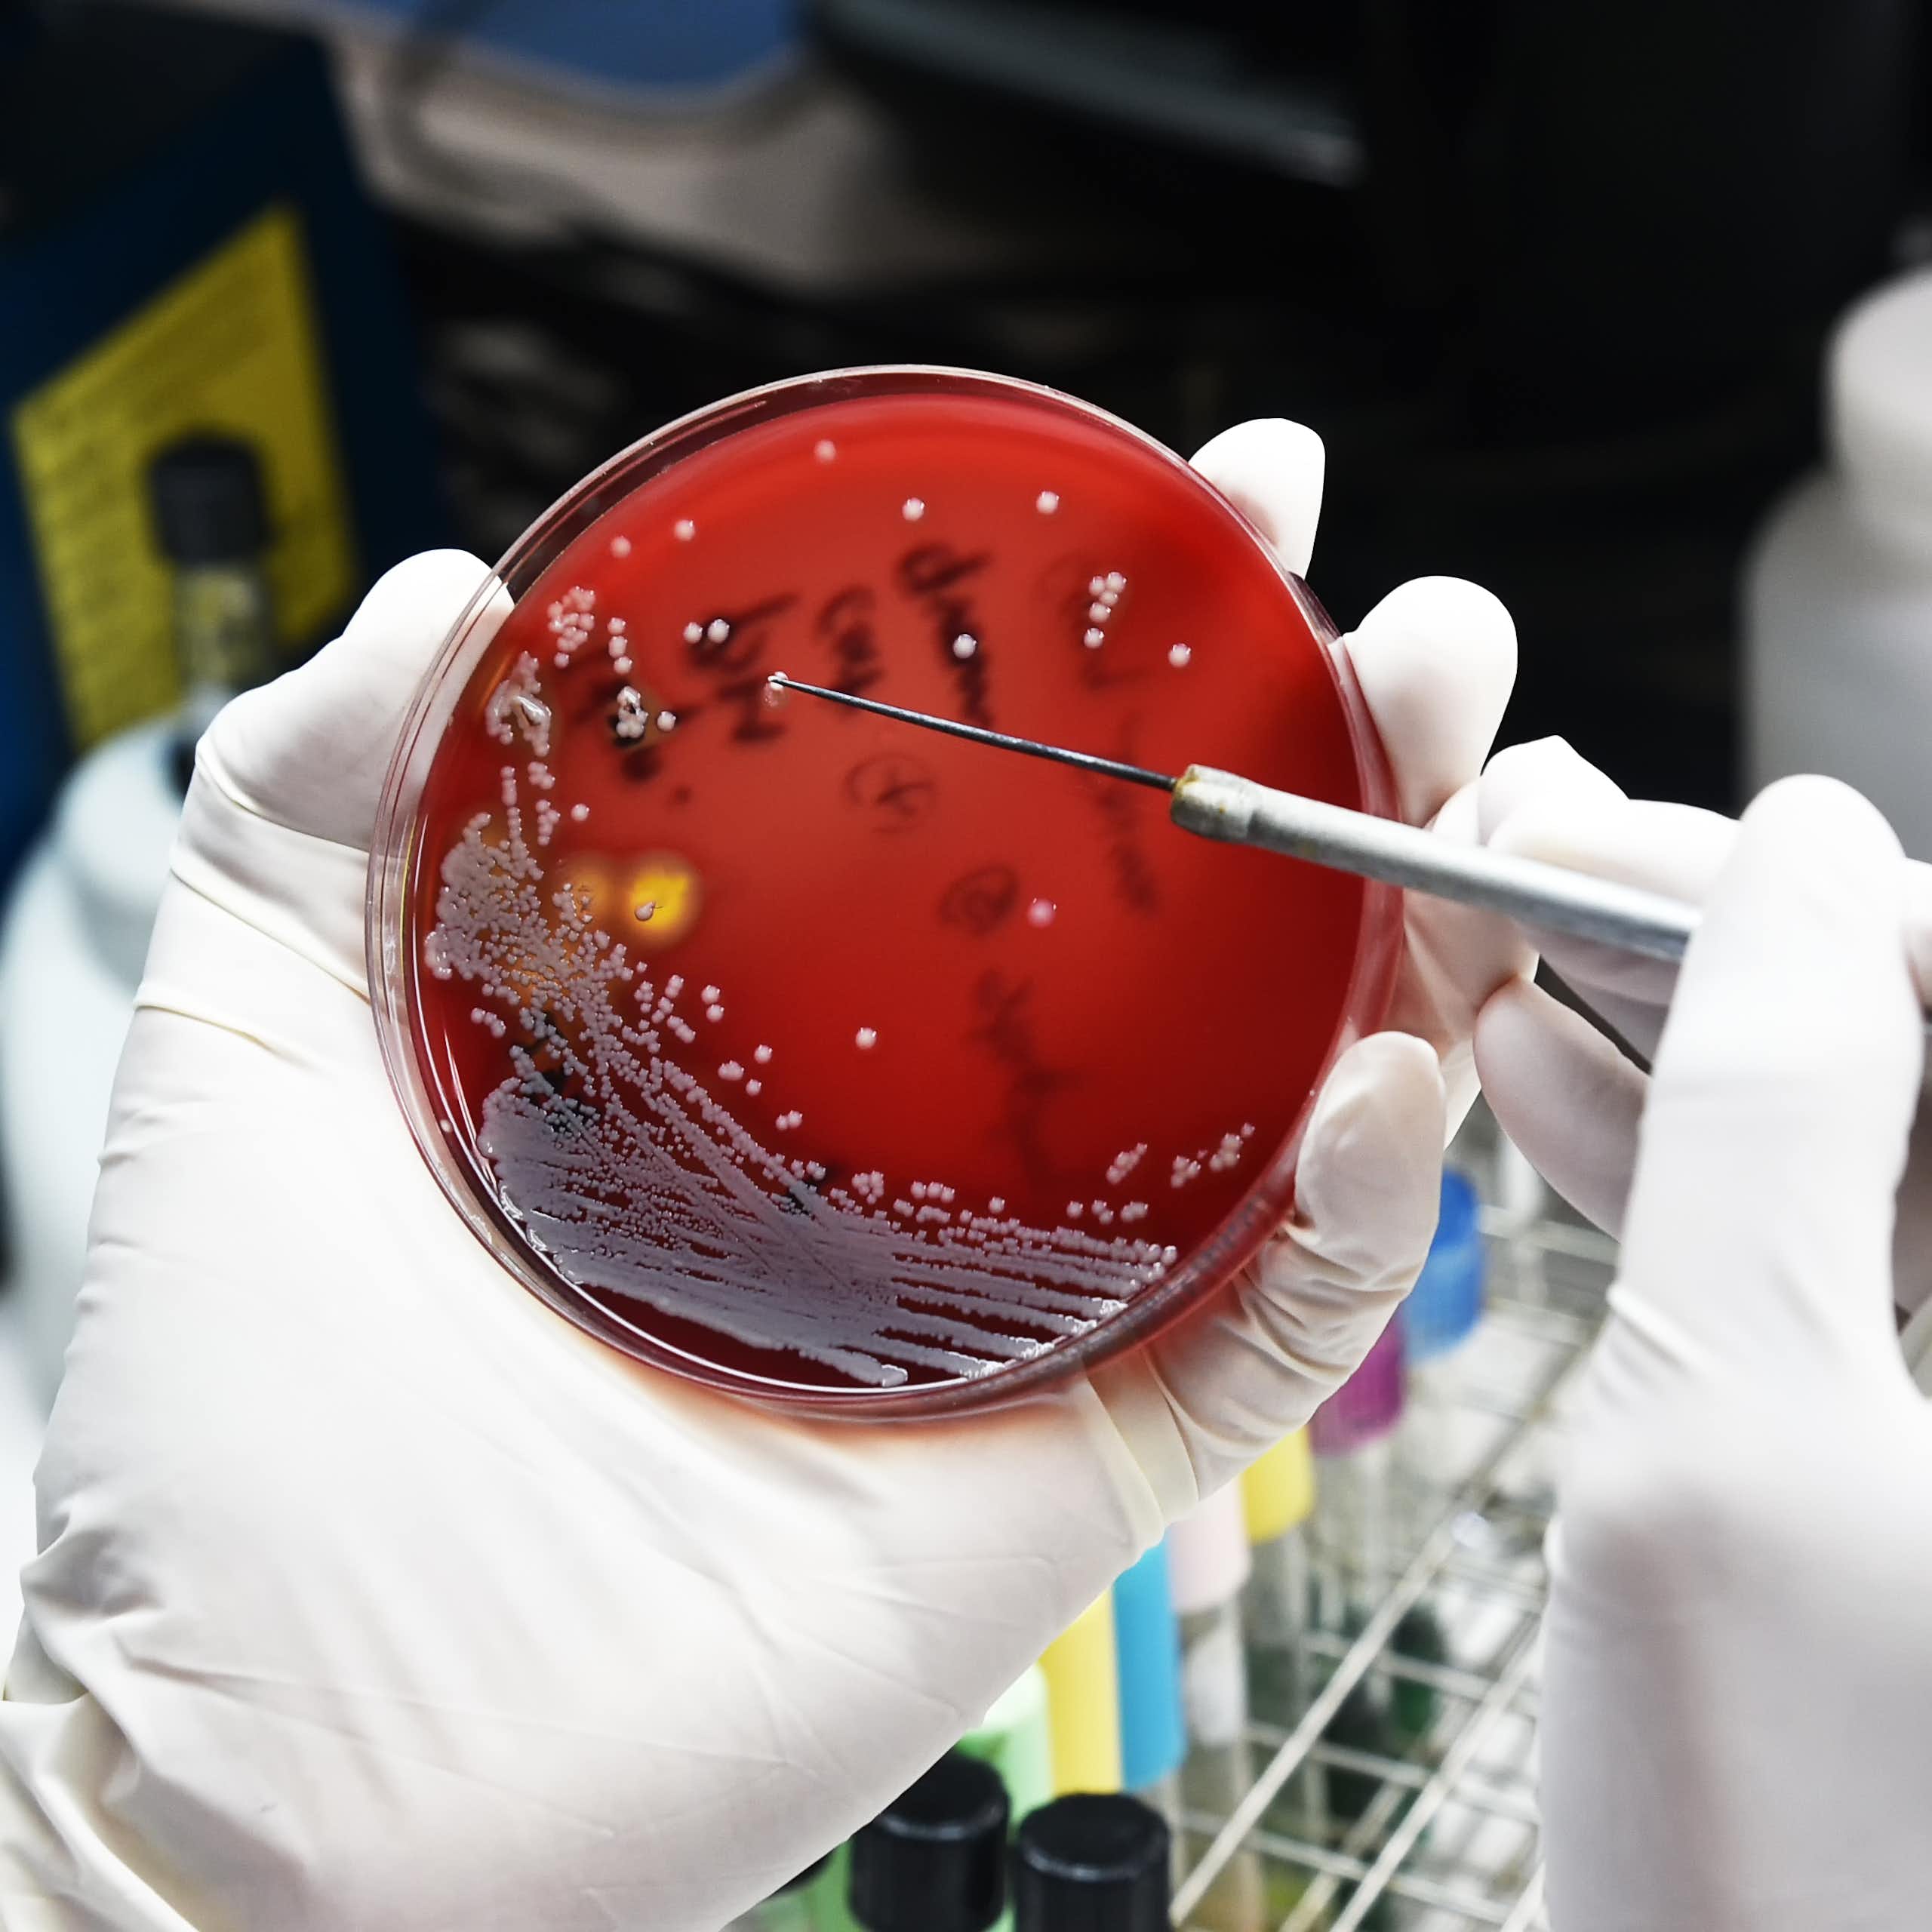 A scientist holds up a petri dish showing drugs being tested against bacteria.